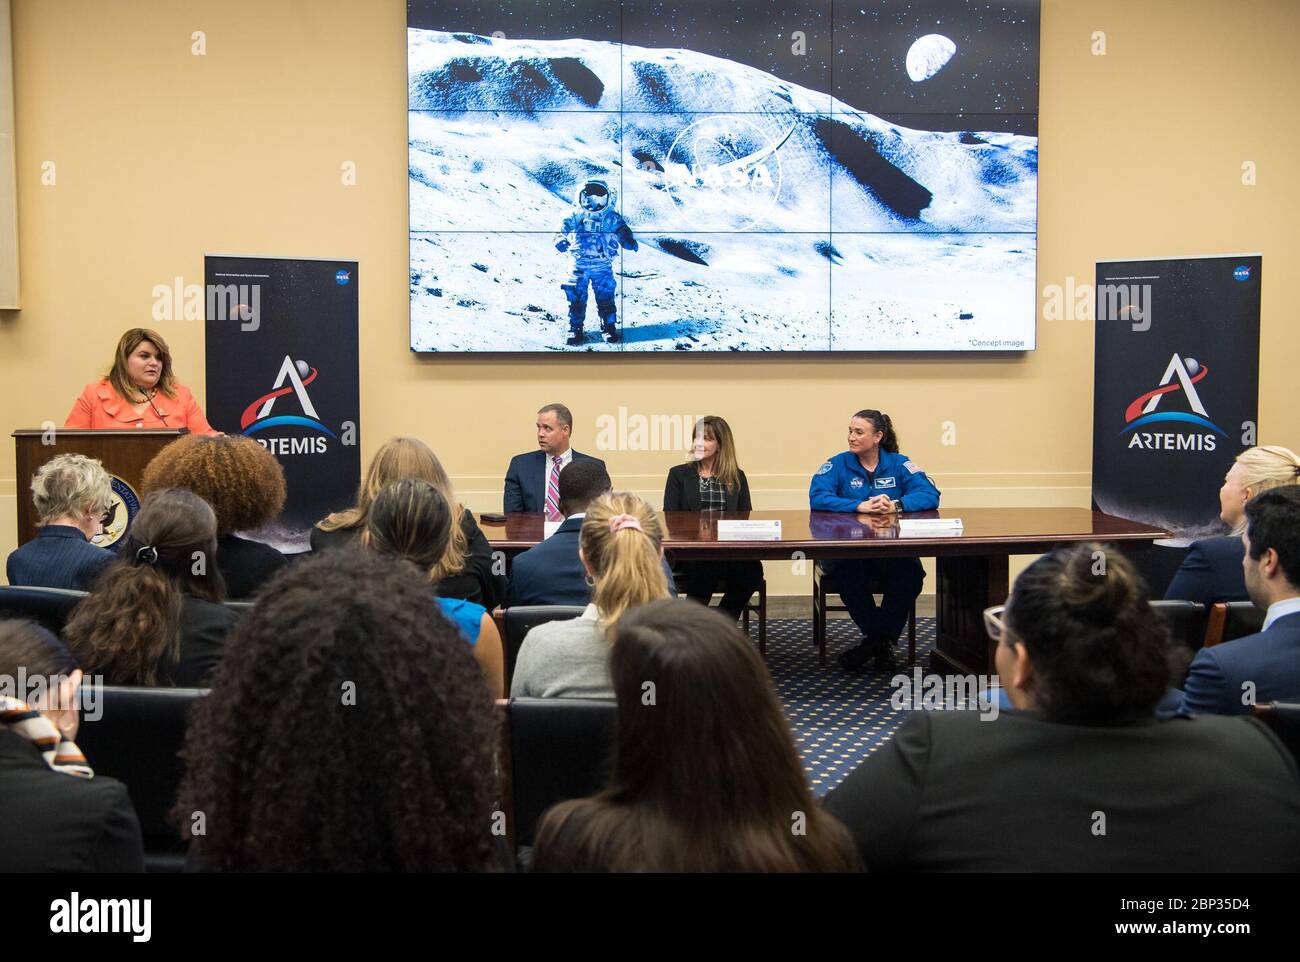 Women's Caucus Event on Artemis  Resident Commissioner of Puerto Rico, Jenniffer González-Colón, R-Puerto Rico, provides opening remarks at a bipartisan Congressional Caucus for Women’s Issues briefing on NASA’s Artemis lunar exploration program, Wednesday, September 11, 2019 at the Rayburn House Office Building in Washington. Stock Photo